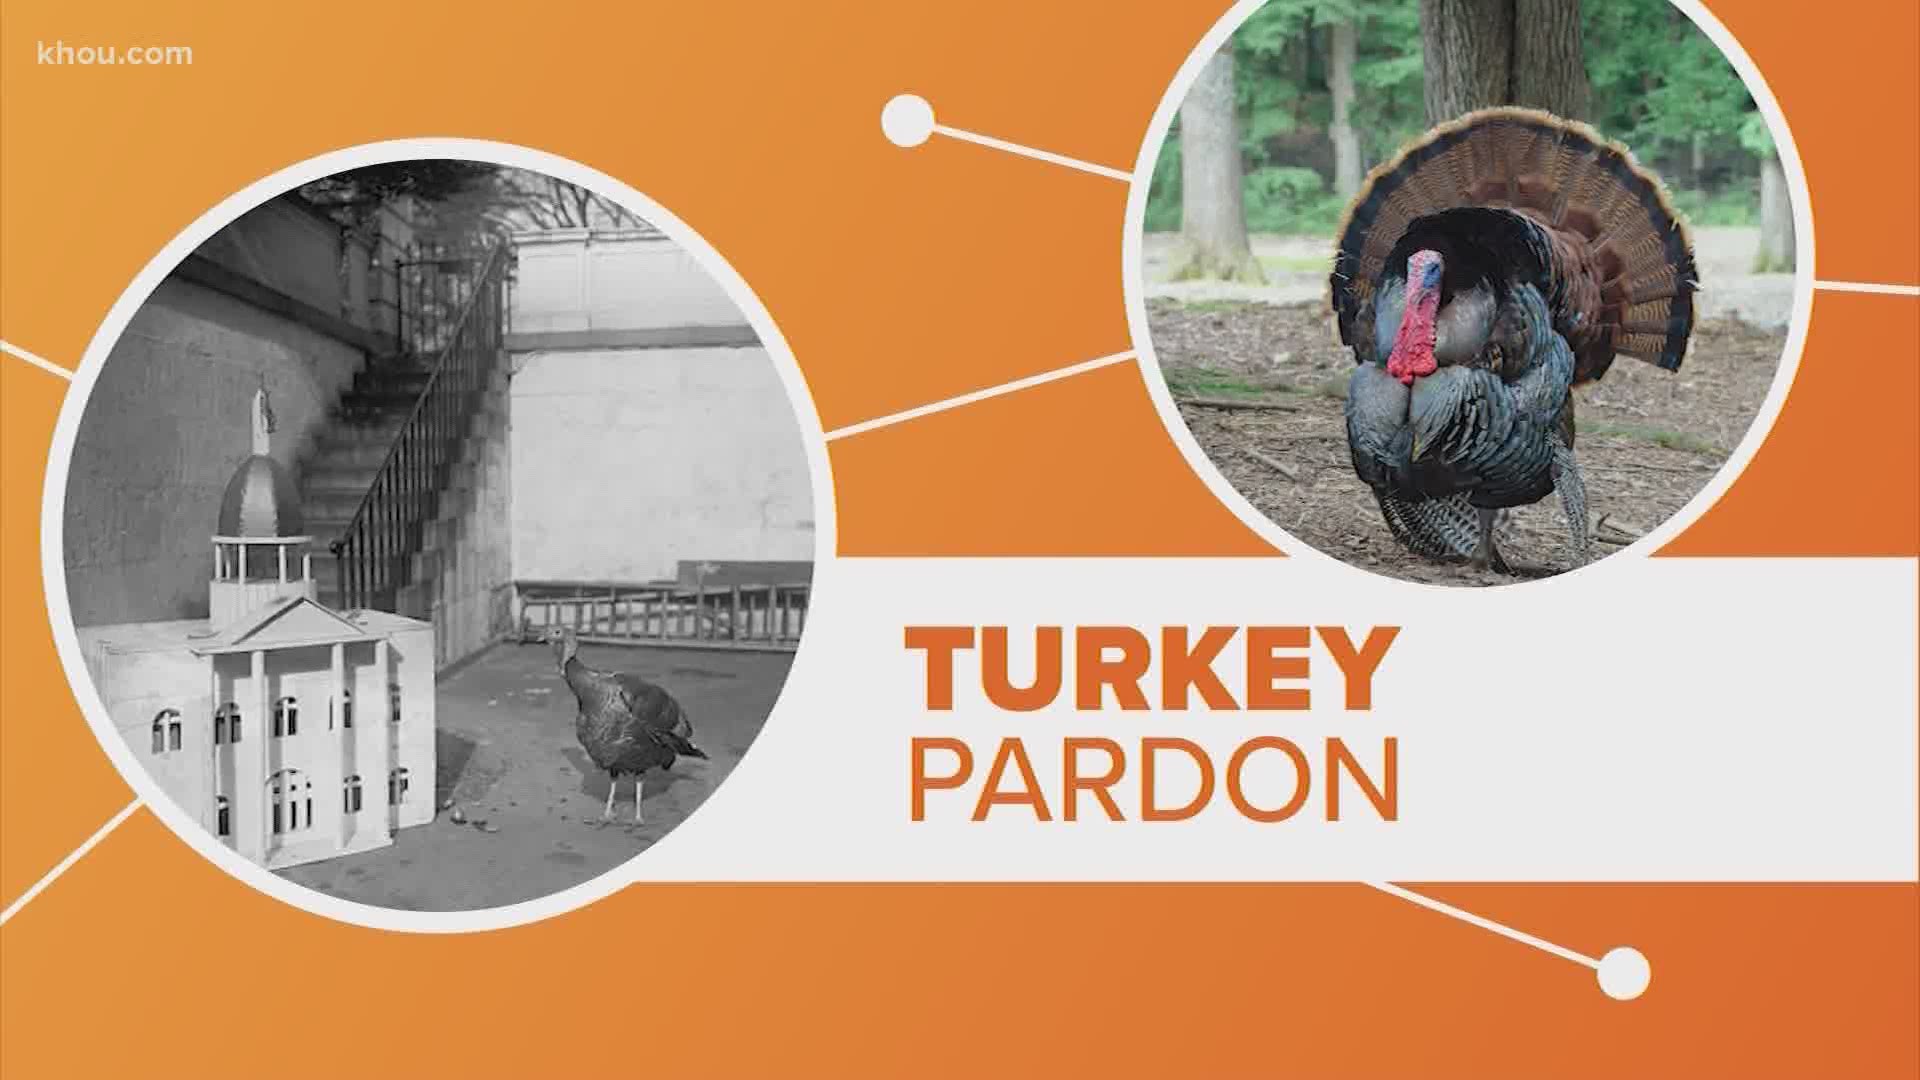 Turkey pardoning is a yearly Thanksgiving tradition at the White House, but which president started it? Surprisingly, the first turkey pardon was during Christmas.